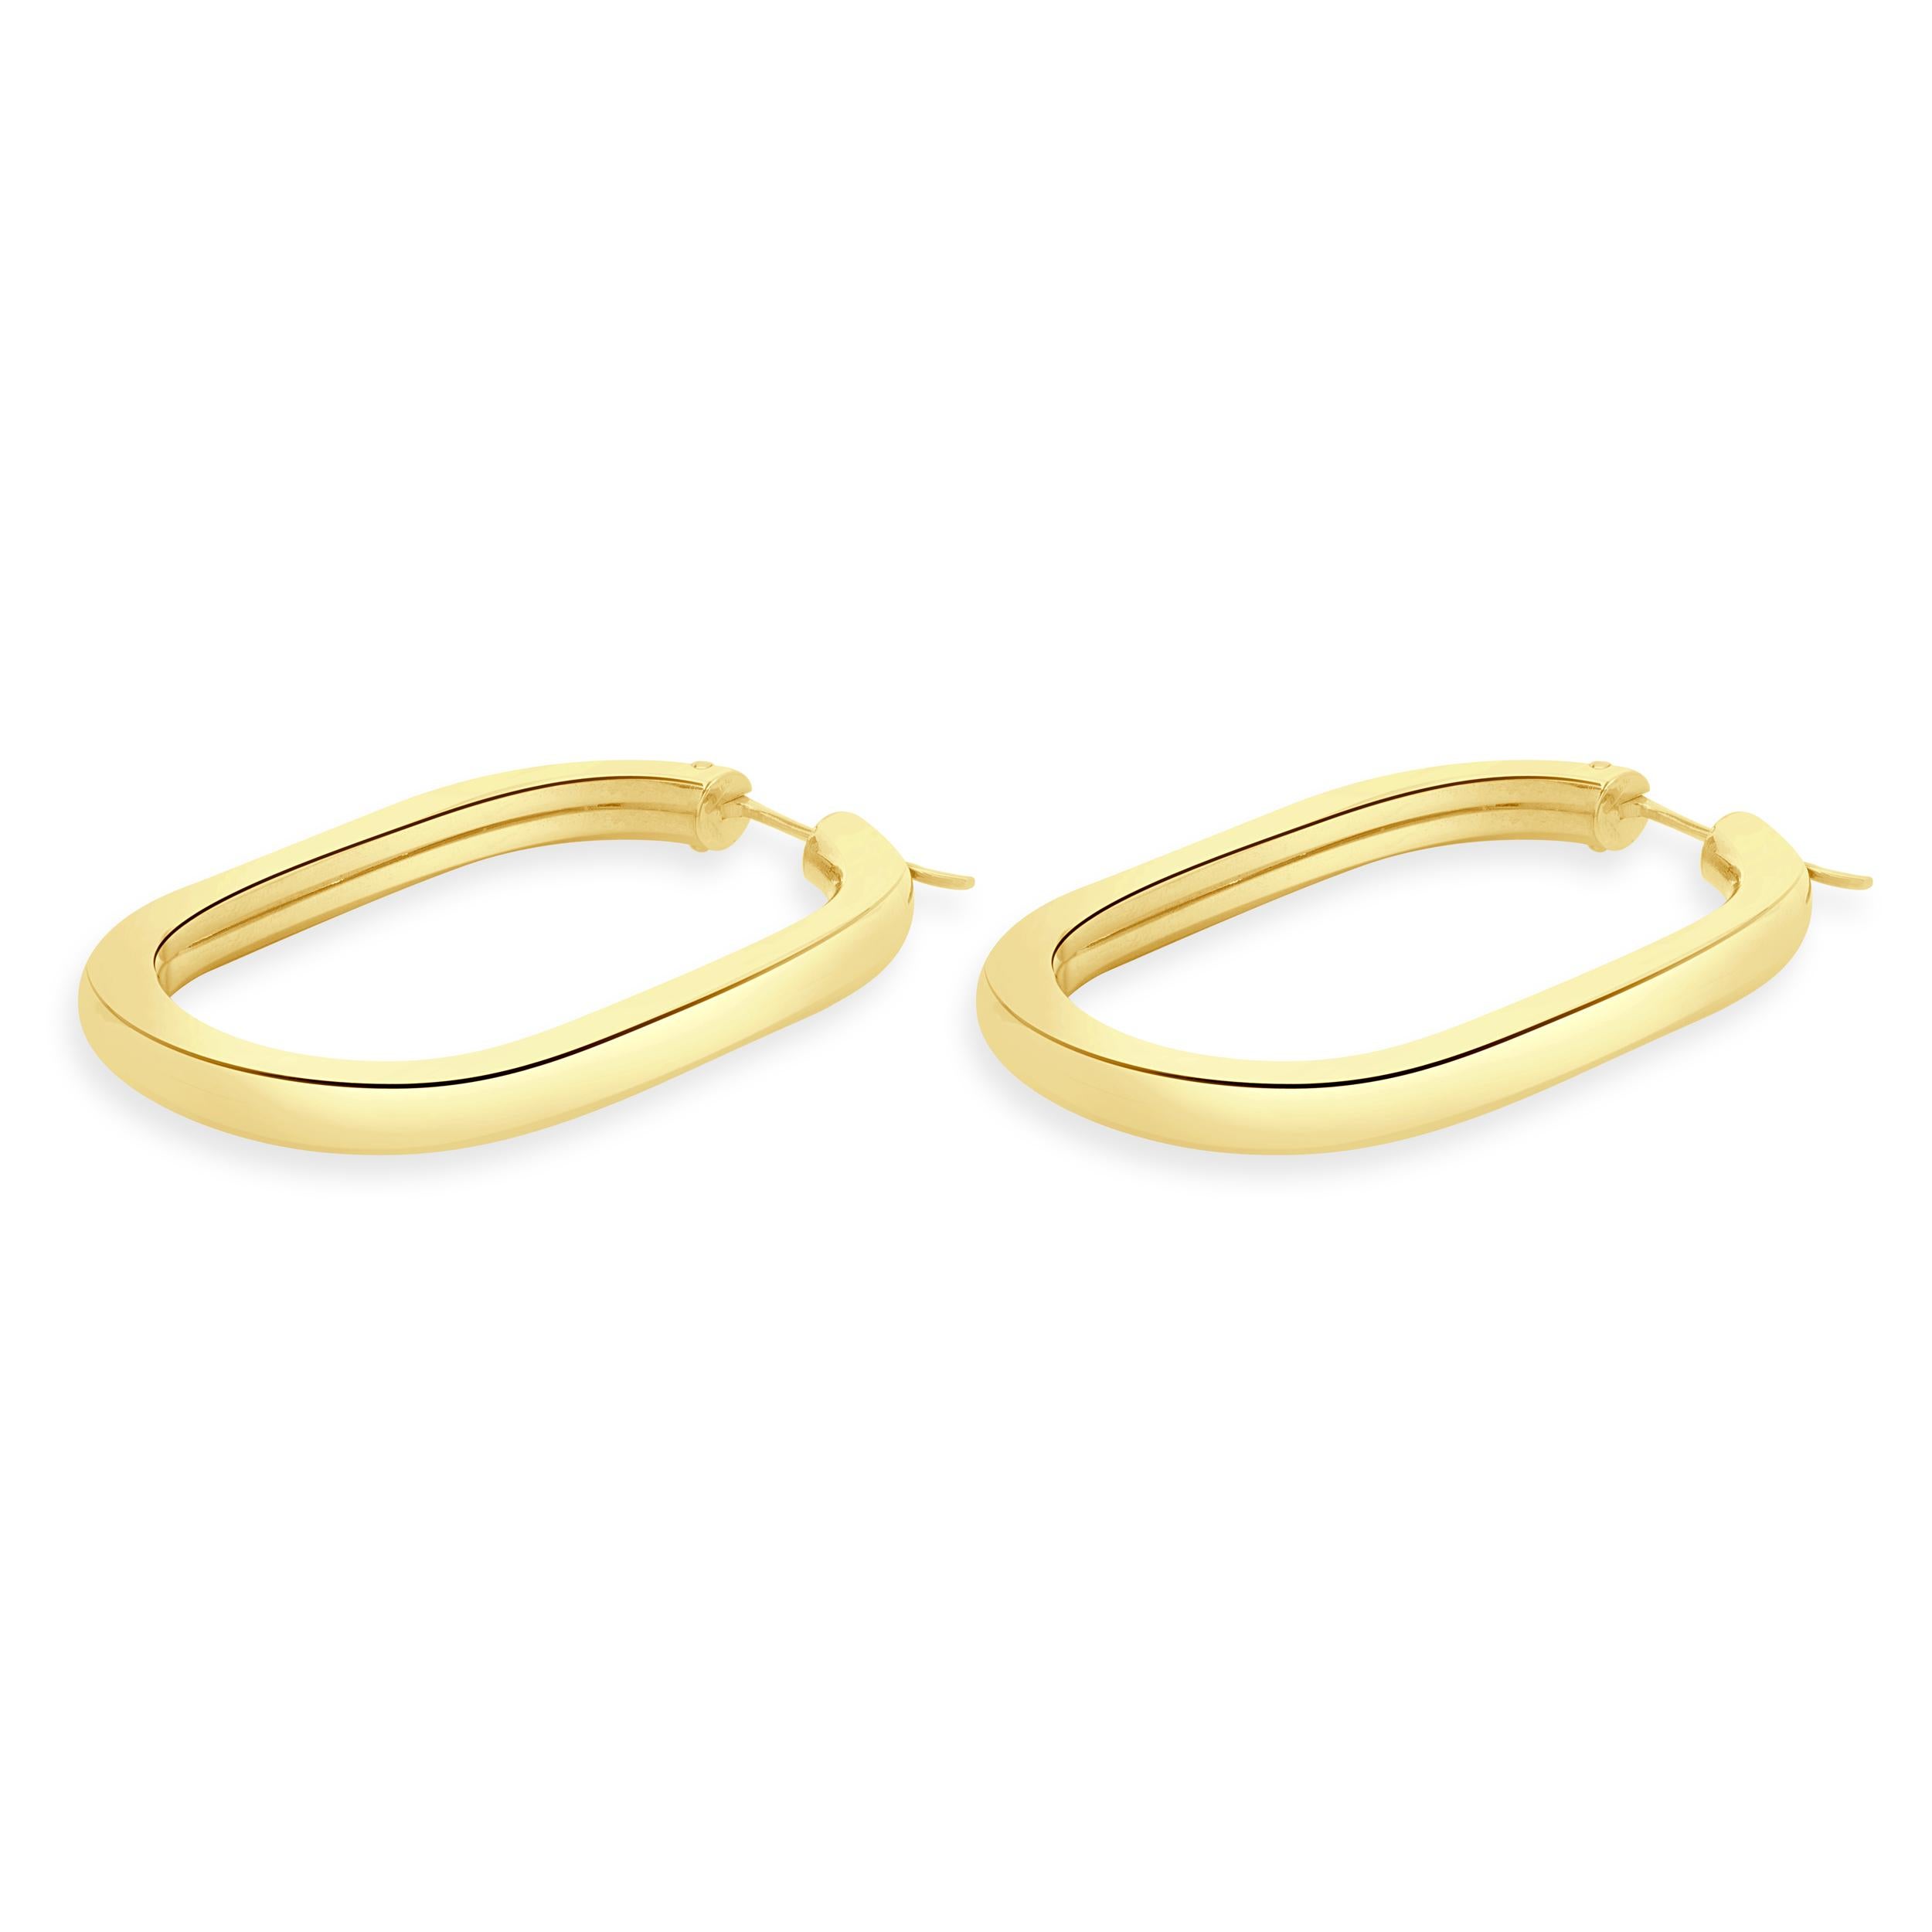 Material: 18K yellow gold
Dimensions: earrings measure 48 x 5mm
Weight:  11.40 grams